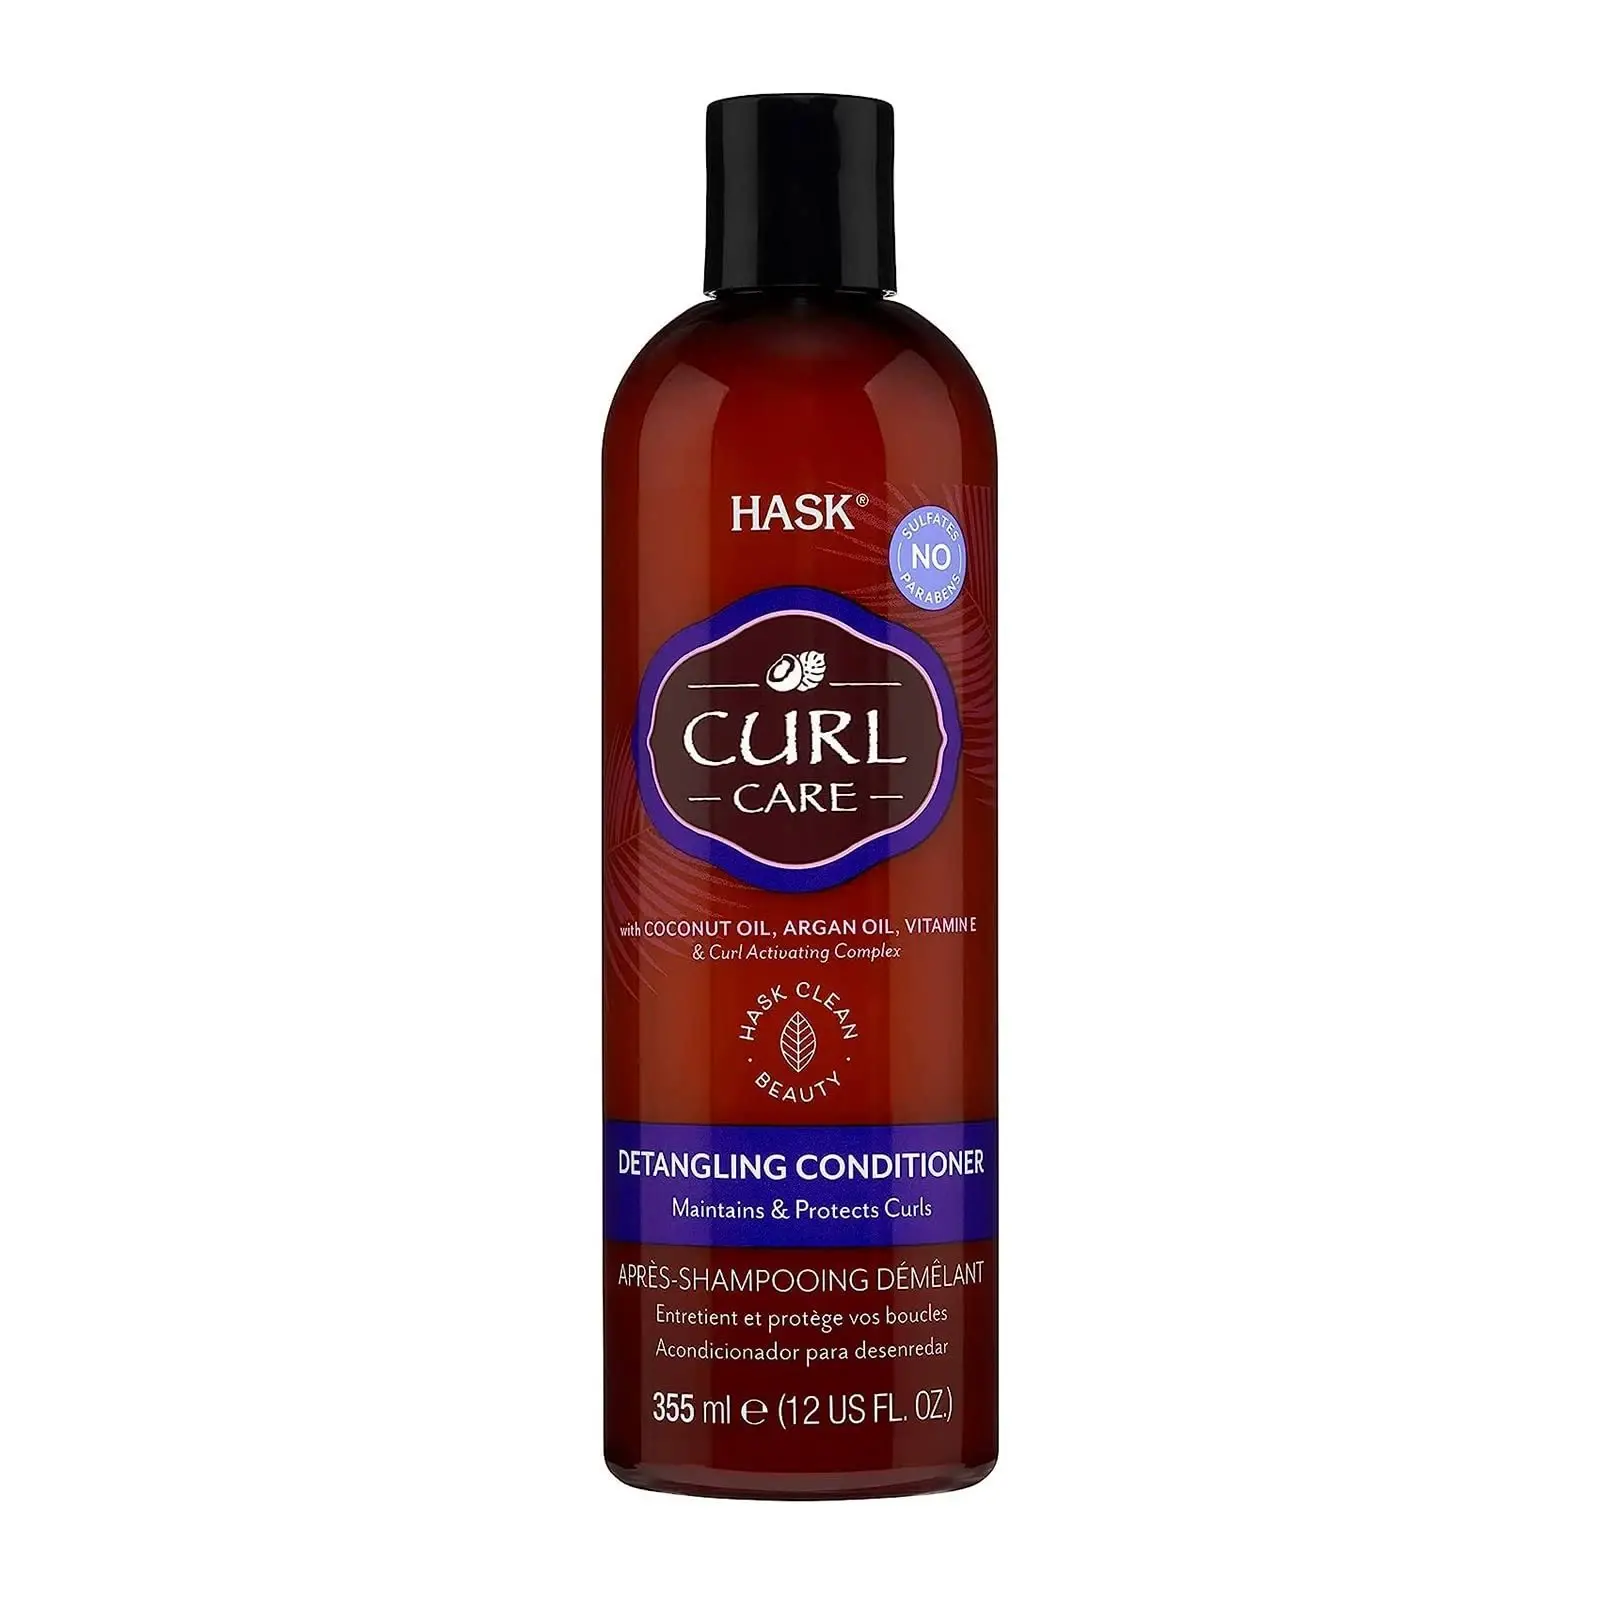 Hask Curl Care Detangling Conditioner 355 ml